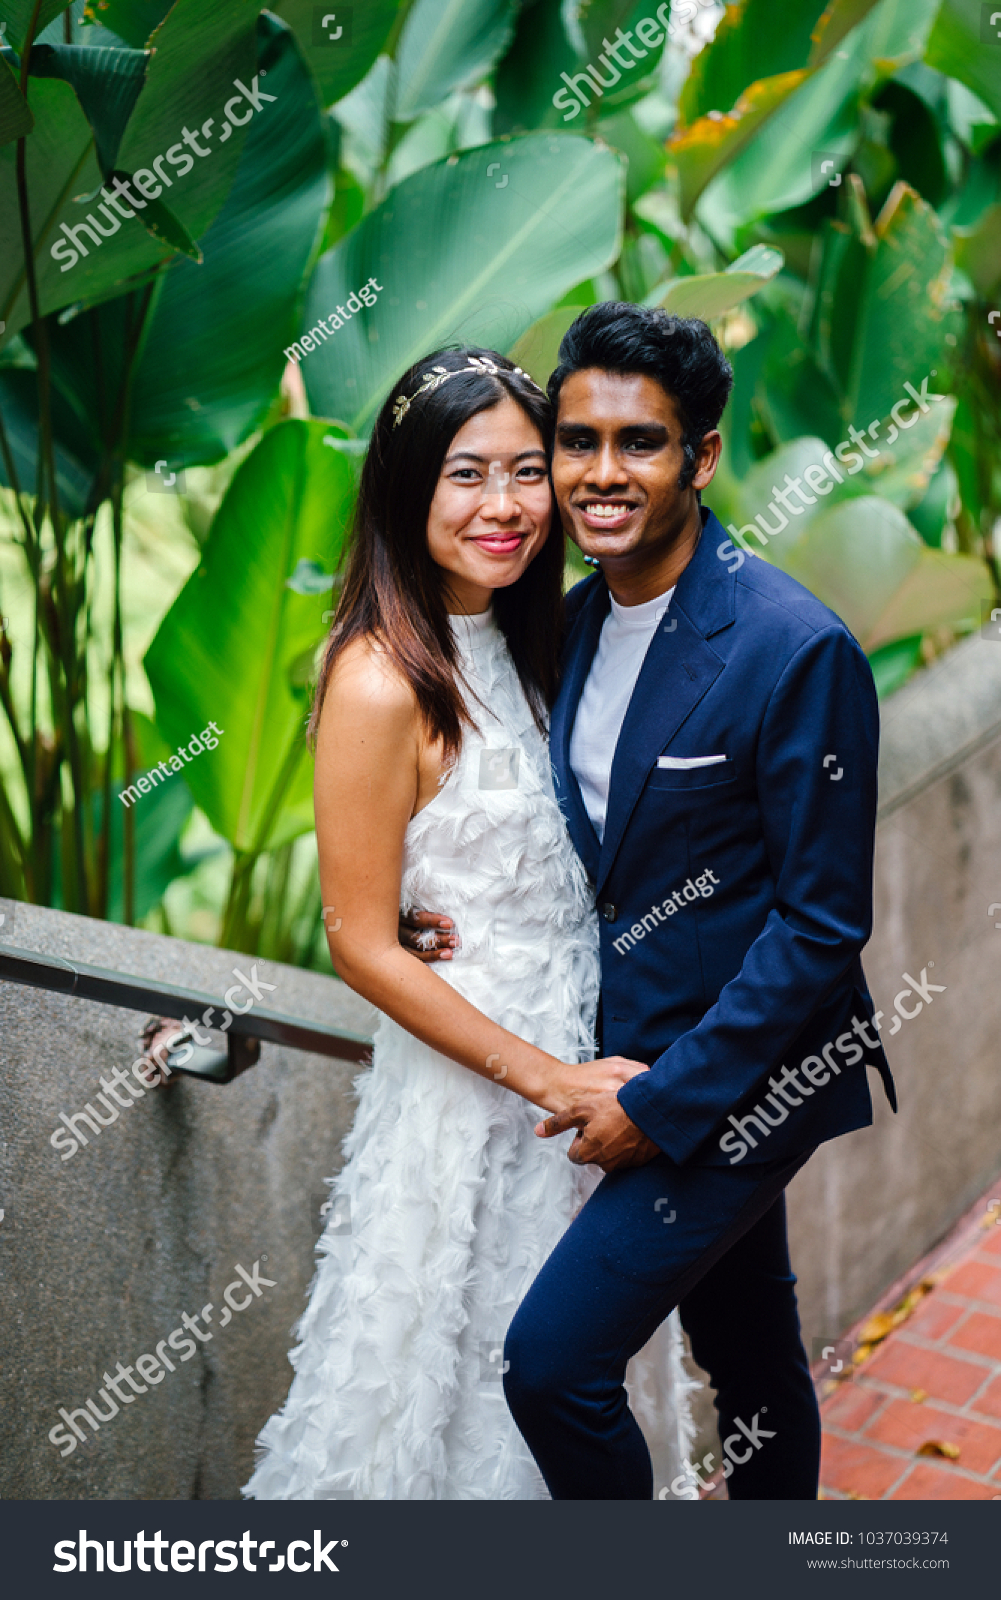 stock-photo-portrait-of-a-happy-interracial-asian-couple-indian-man-chinese-woman-taking-wedding-photographs-1037039374.jpg